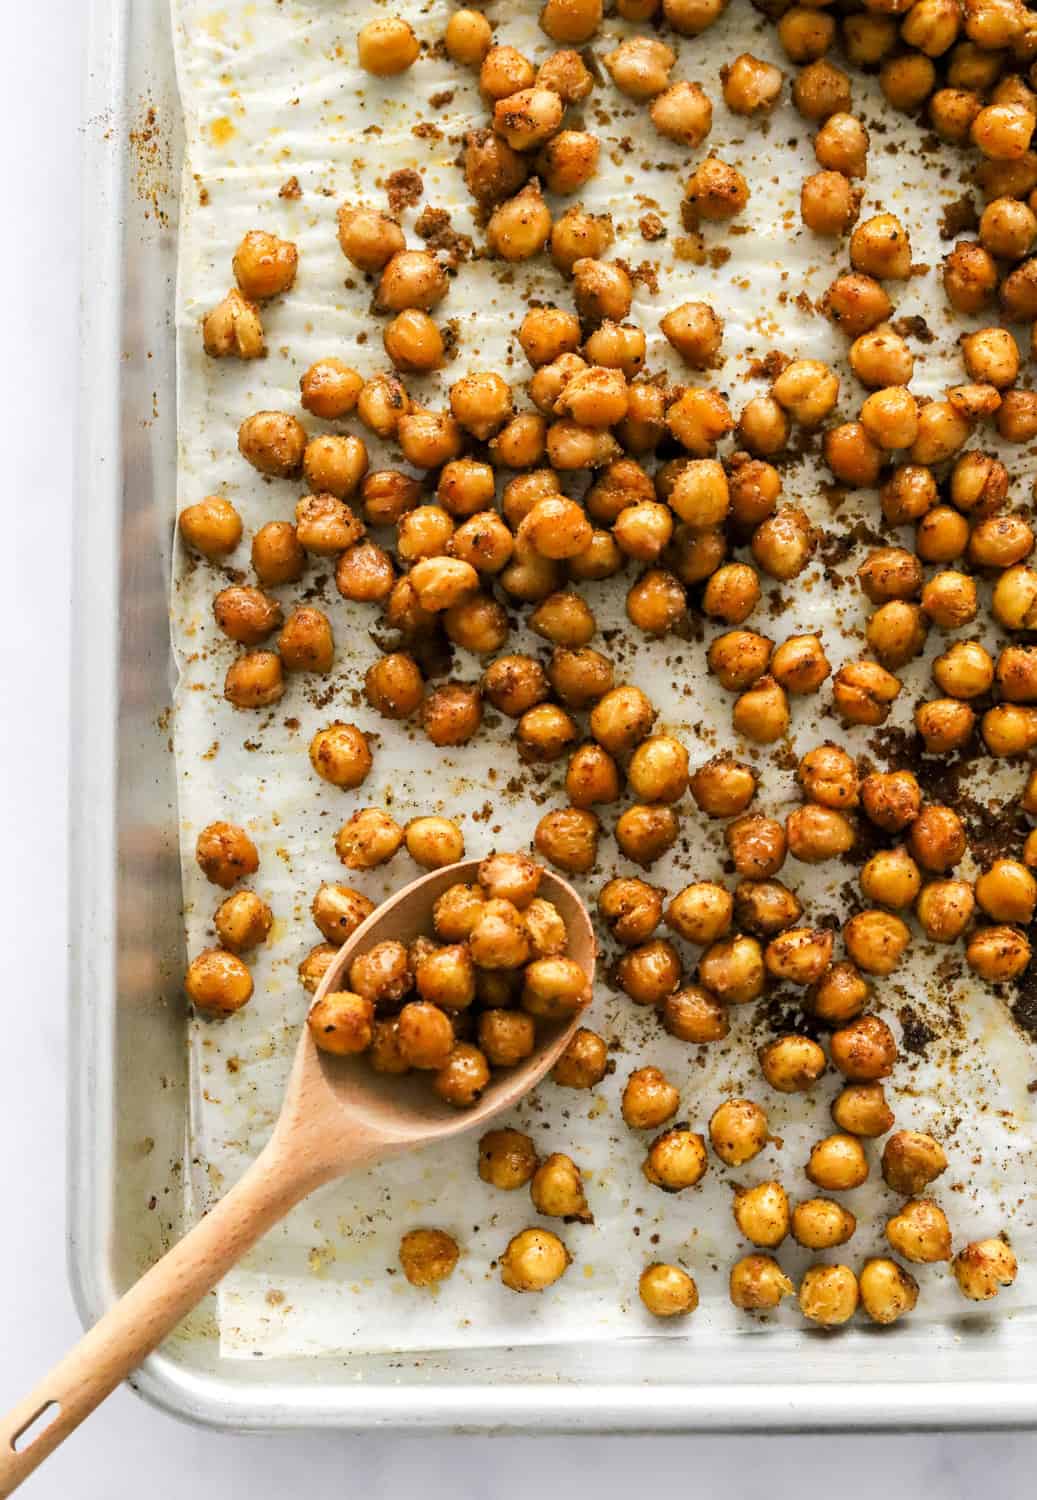 Oven roasted chickpeas on a baking sheet with a wooden spoon with some chickpeas on it on the baking sheet. 